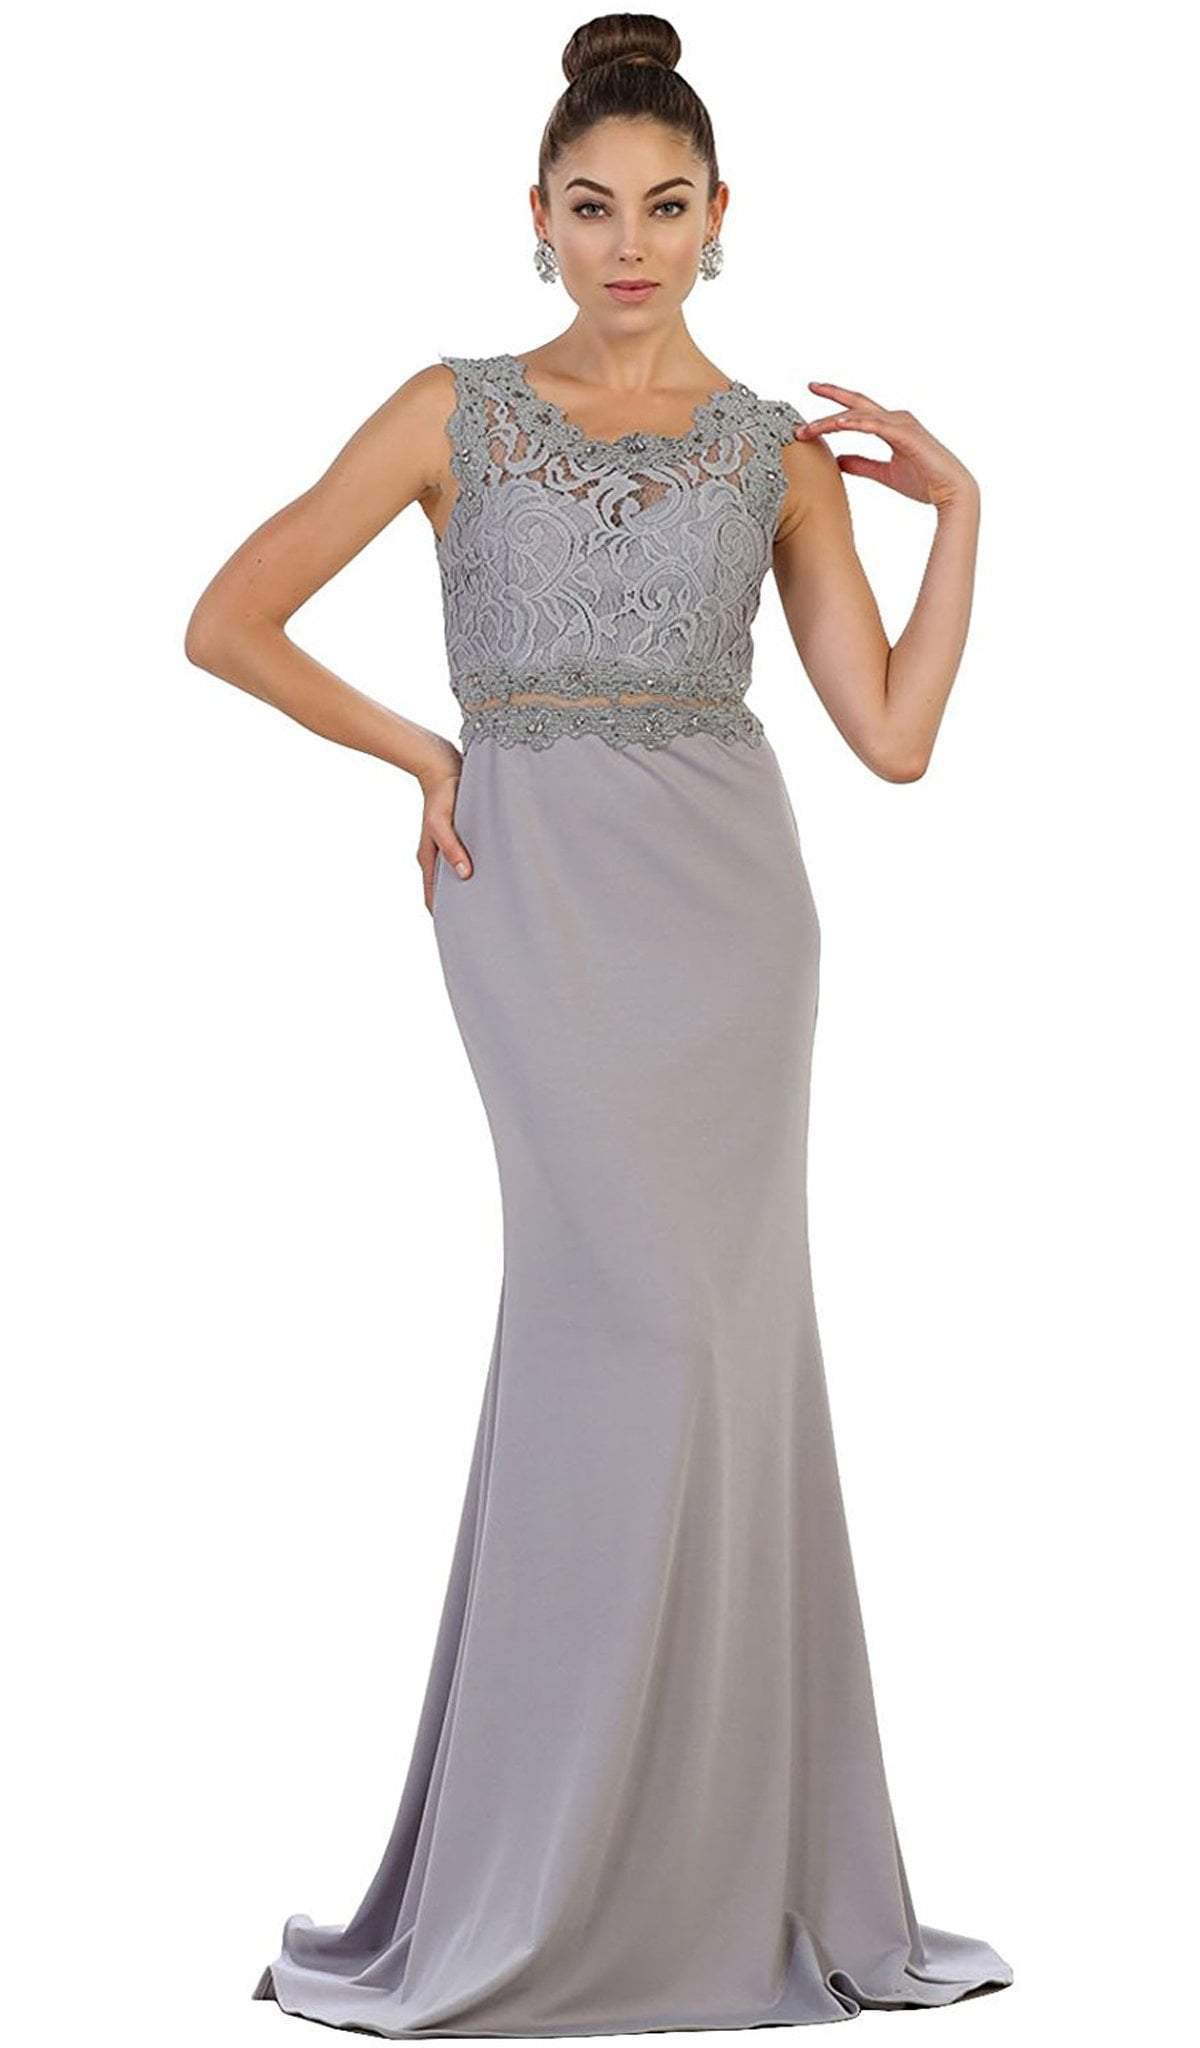 May Queen - Lace Bodice Illusion Paneled Sheath Evening Gown Special Occasion Dress 4 / Silver